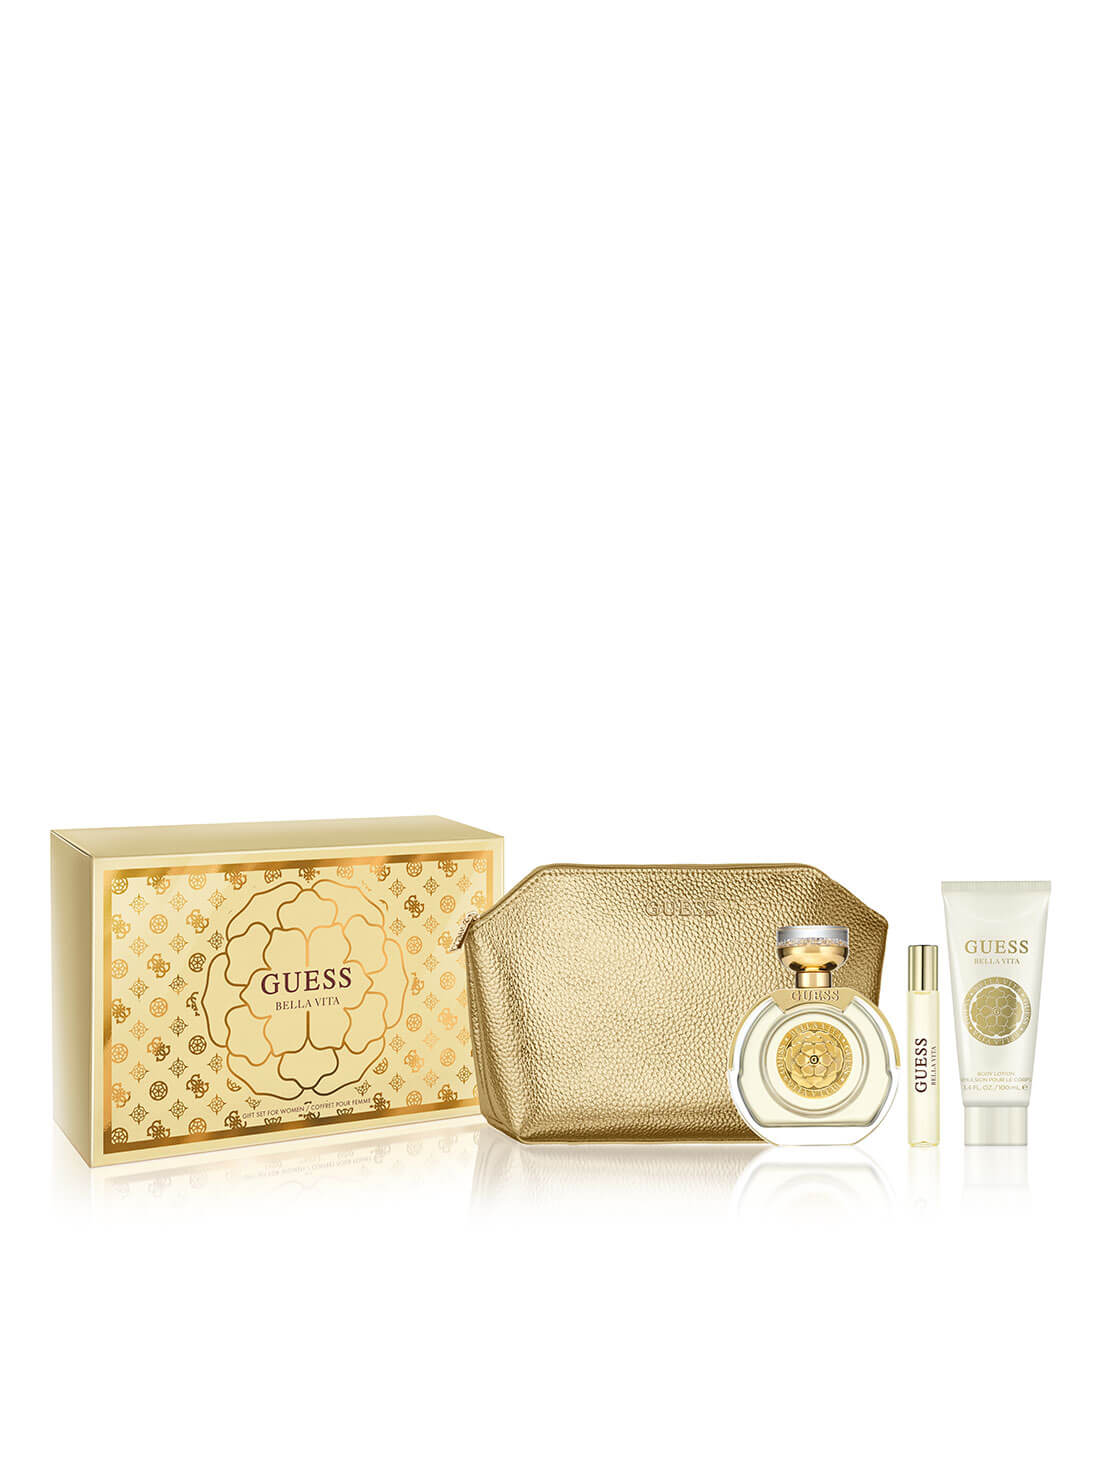 Bella Vita For Women Fragrance Giftset 100ML | GUESS Fragrances | Front view